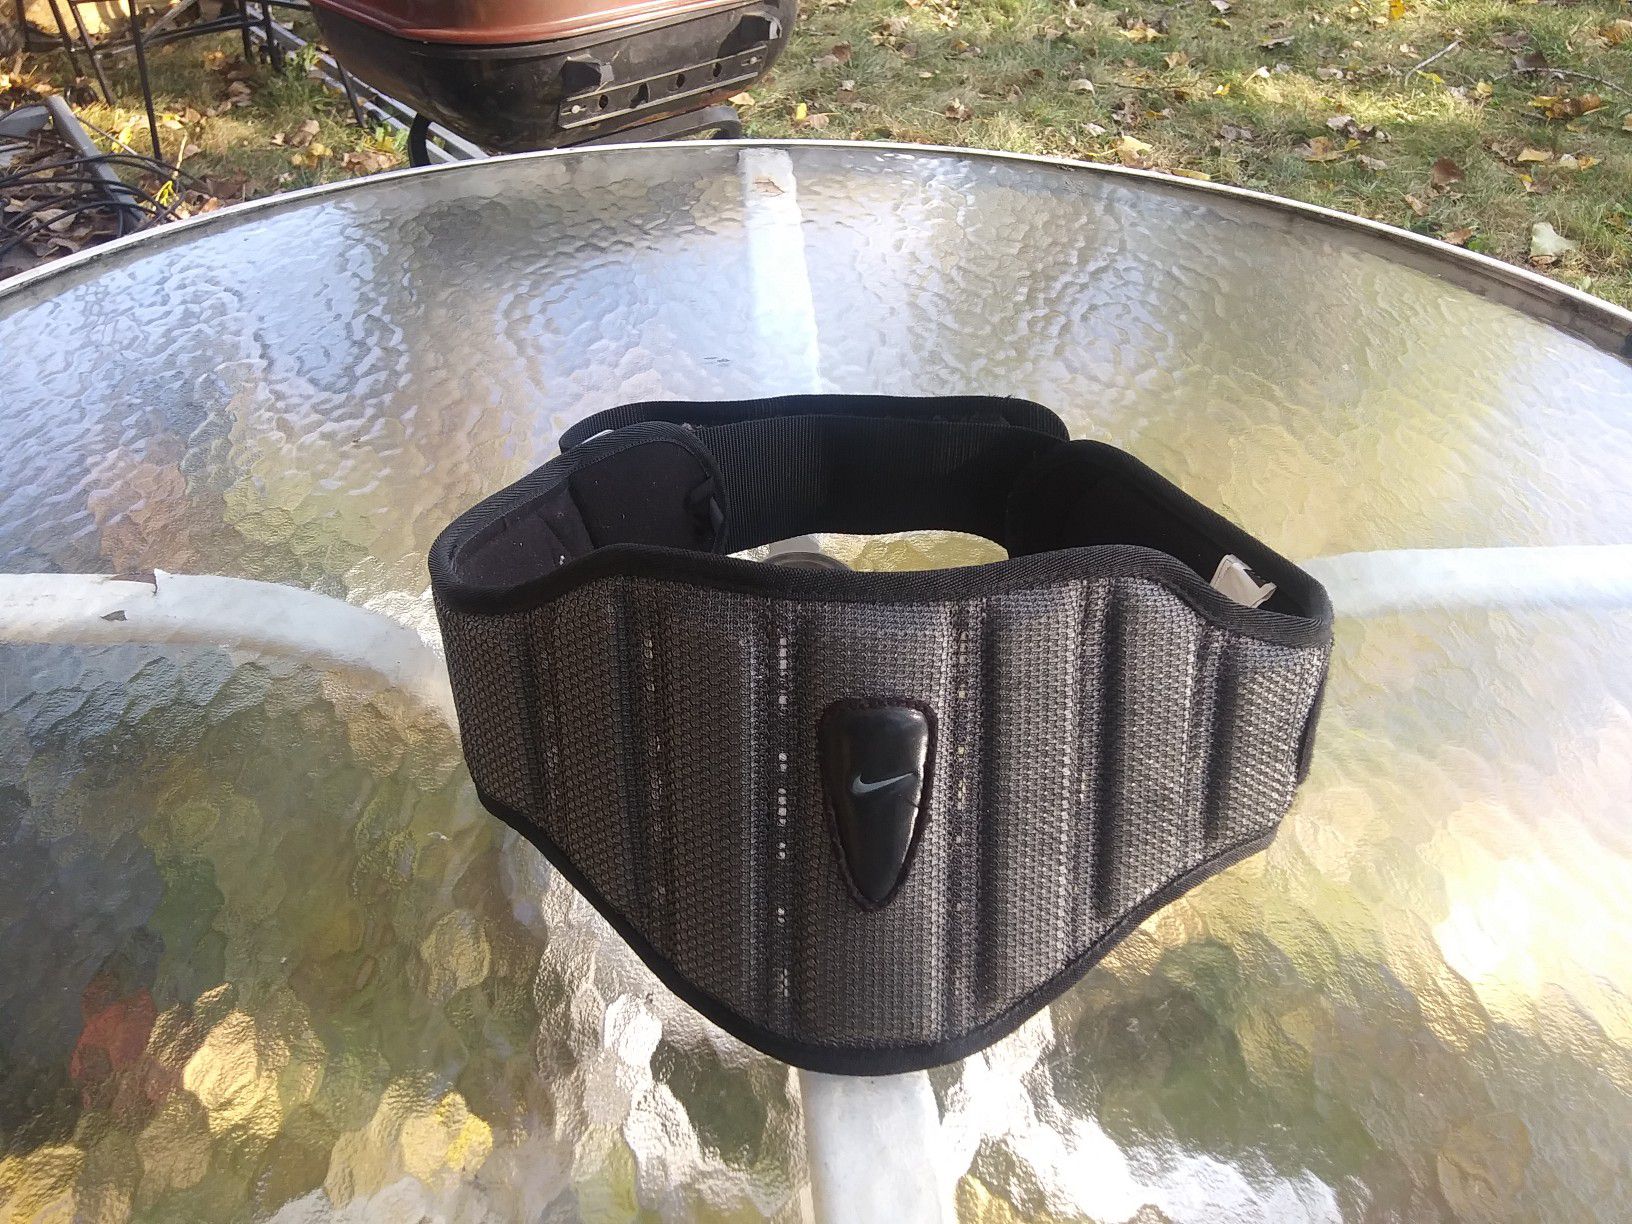 Nike weight lifting belt size L. Fits 36" to 38" waist.